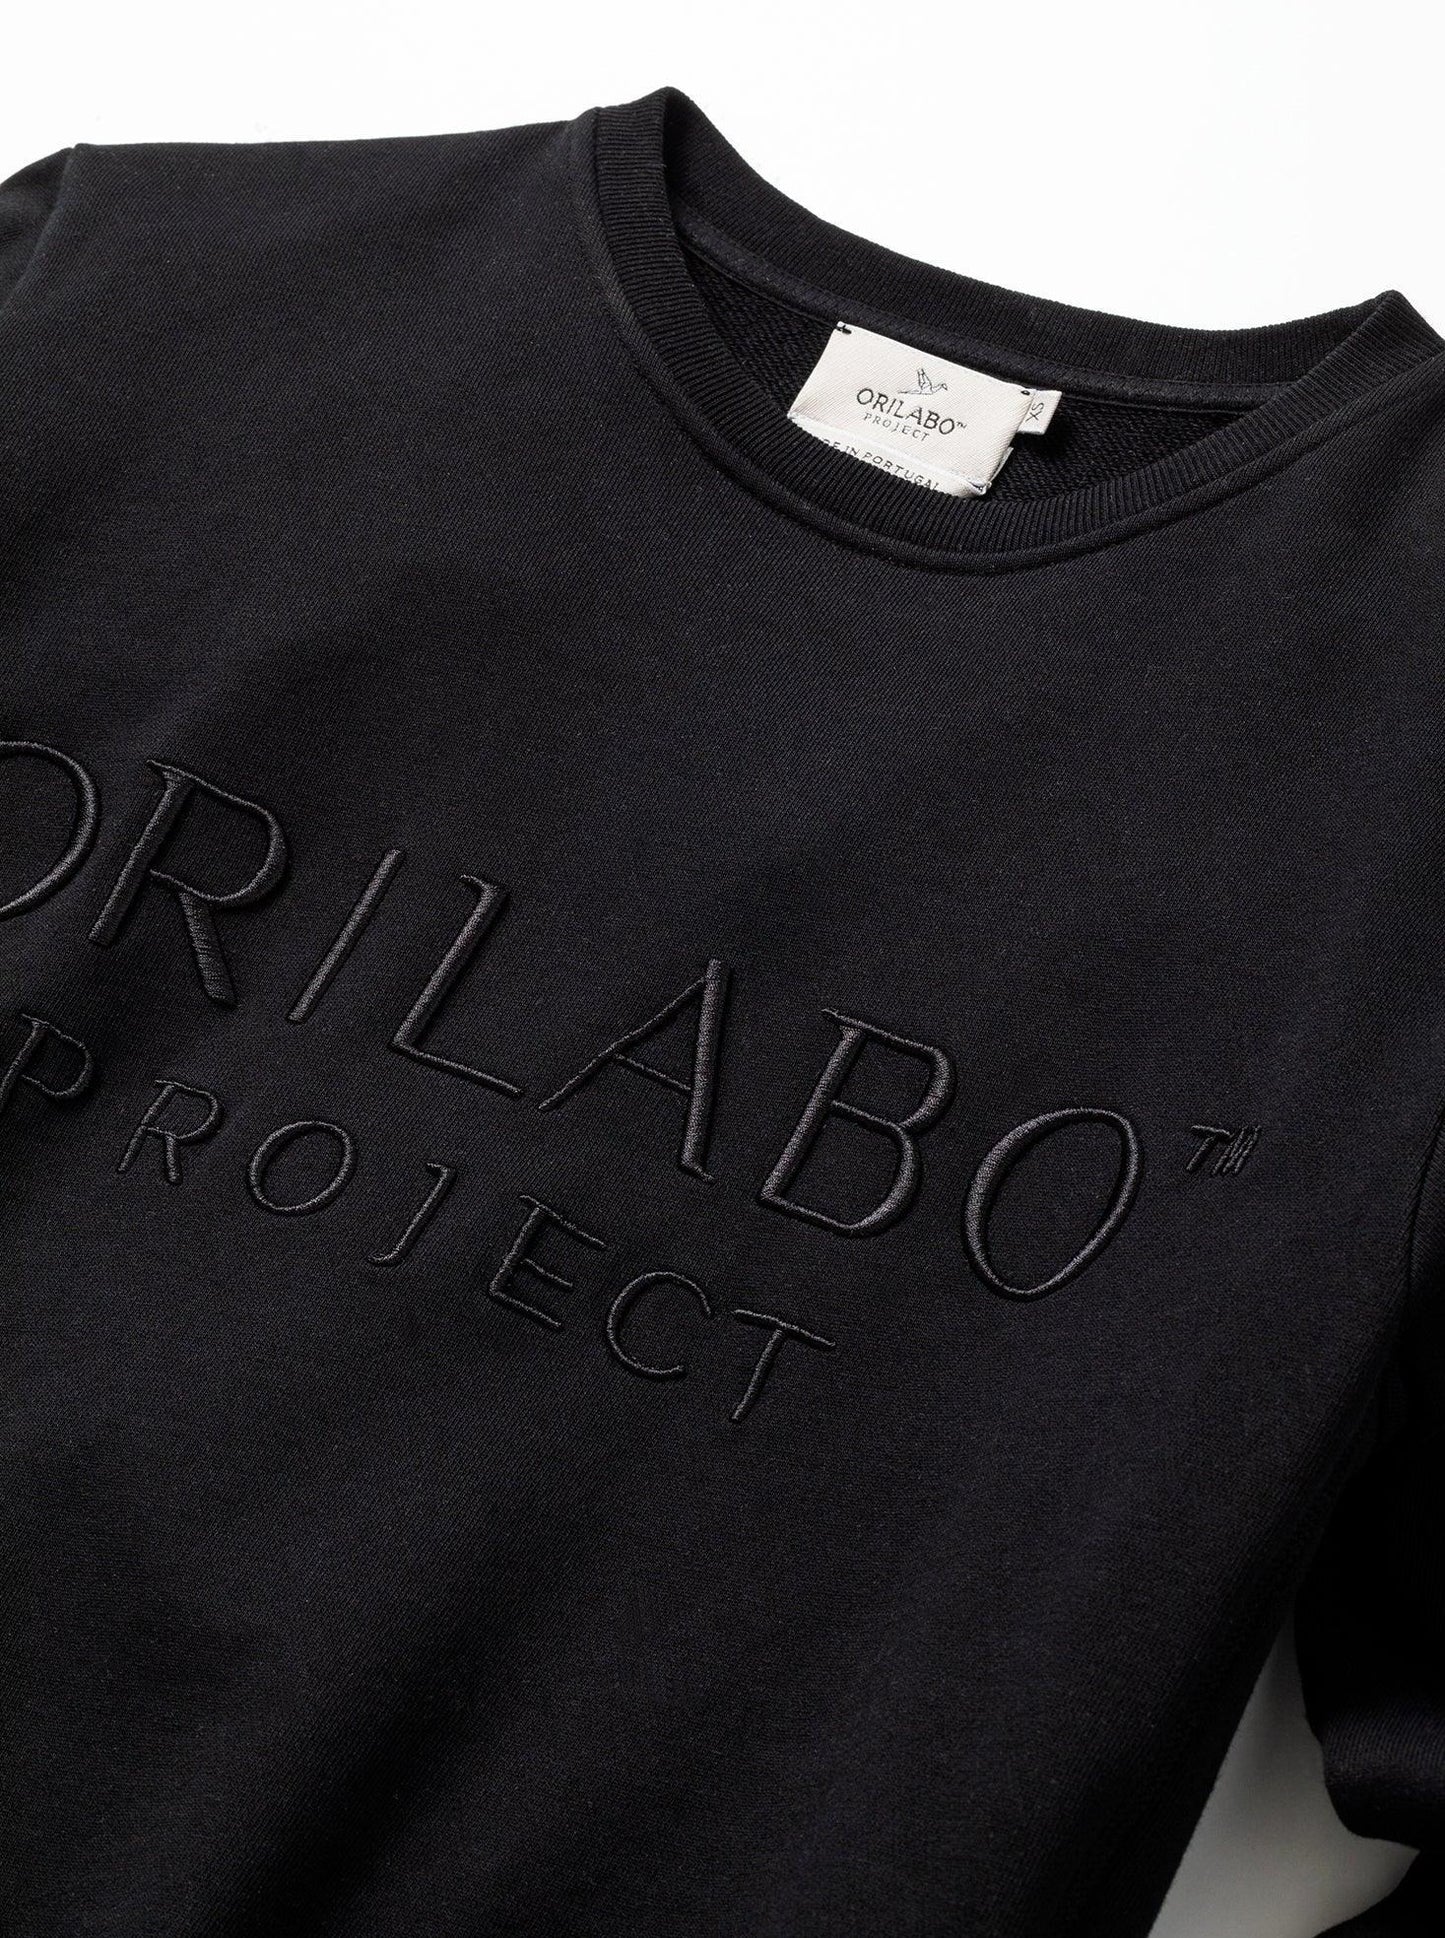 
                  
                    Women's Terry Cropped & Embroided Crewneck - Black - ORILABO Project
                  
                